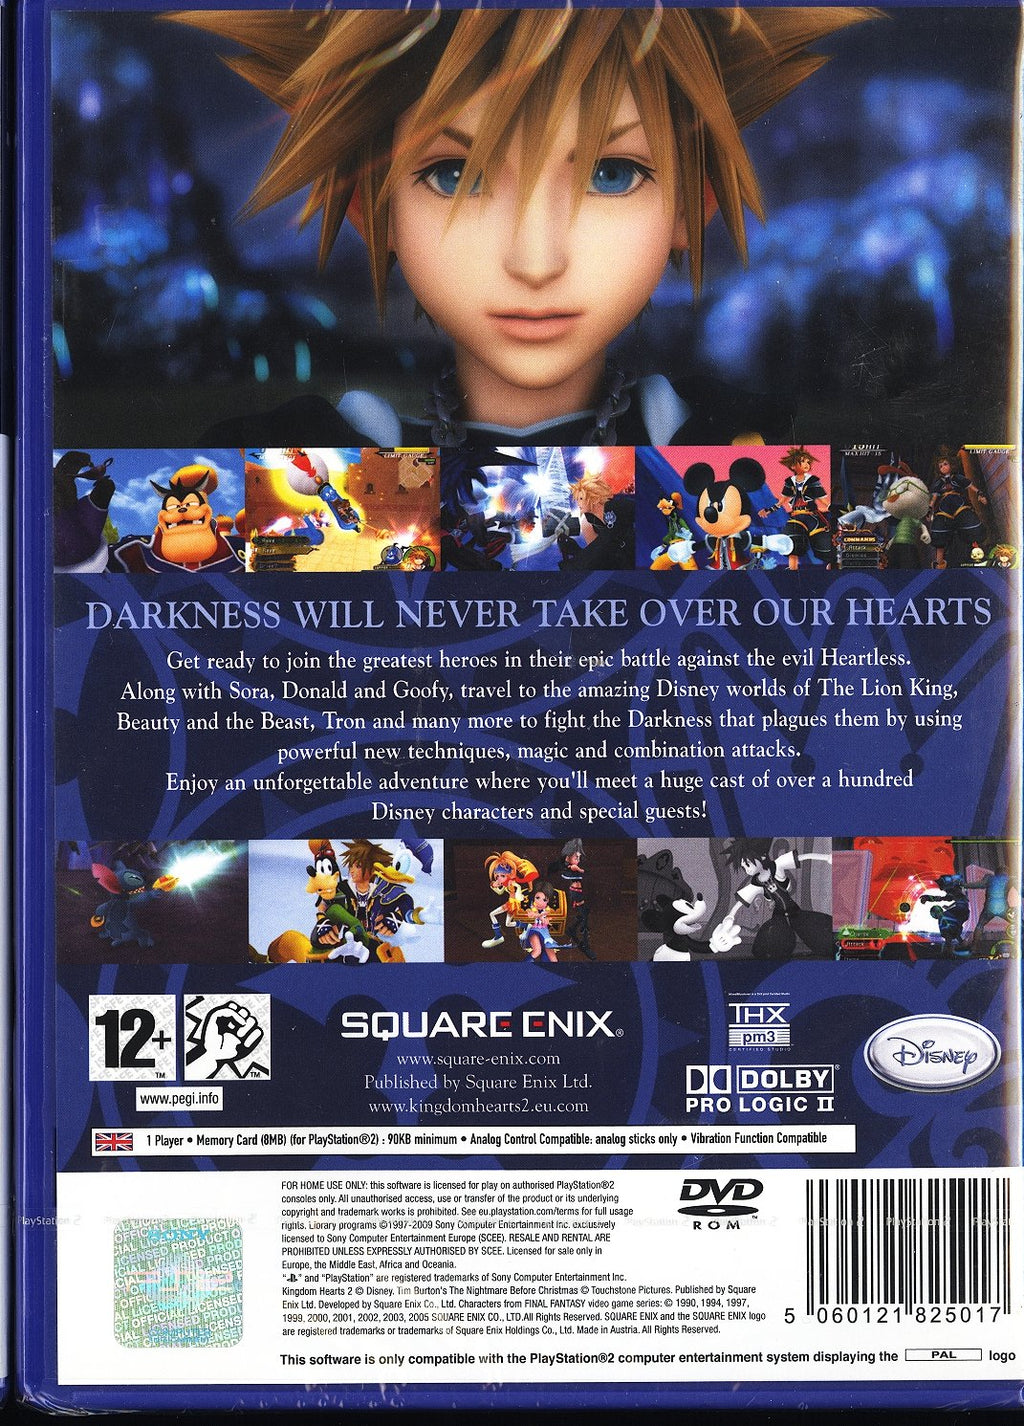 Kingdom Hearts - Complete PS2 game for Sale